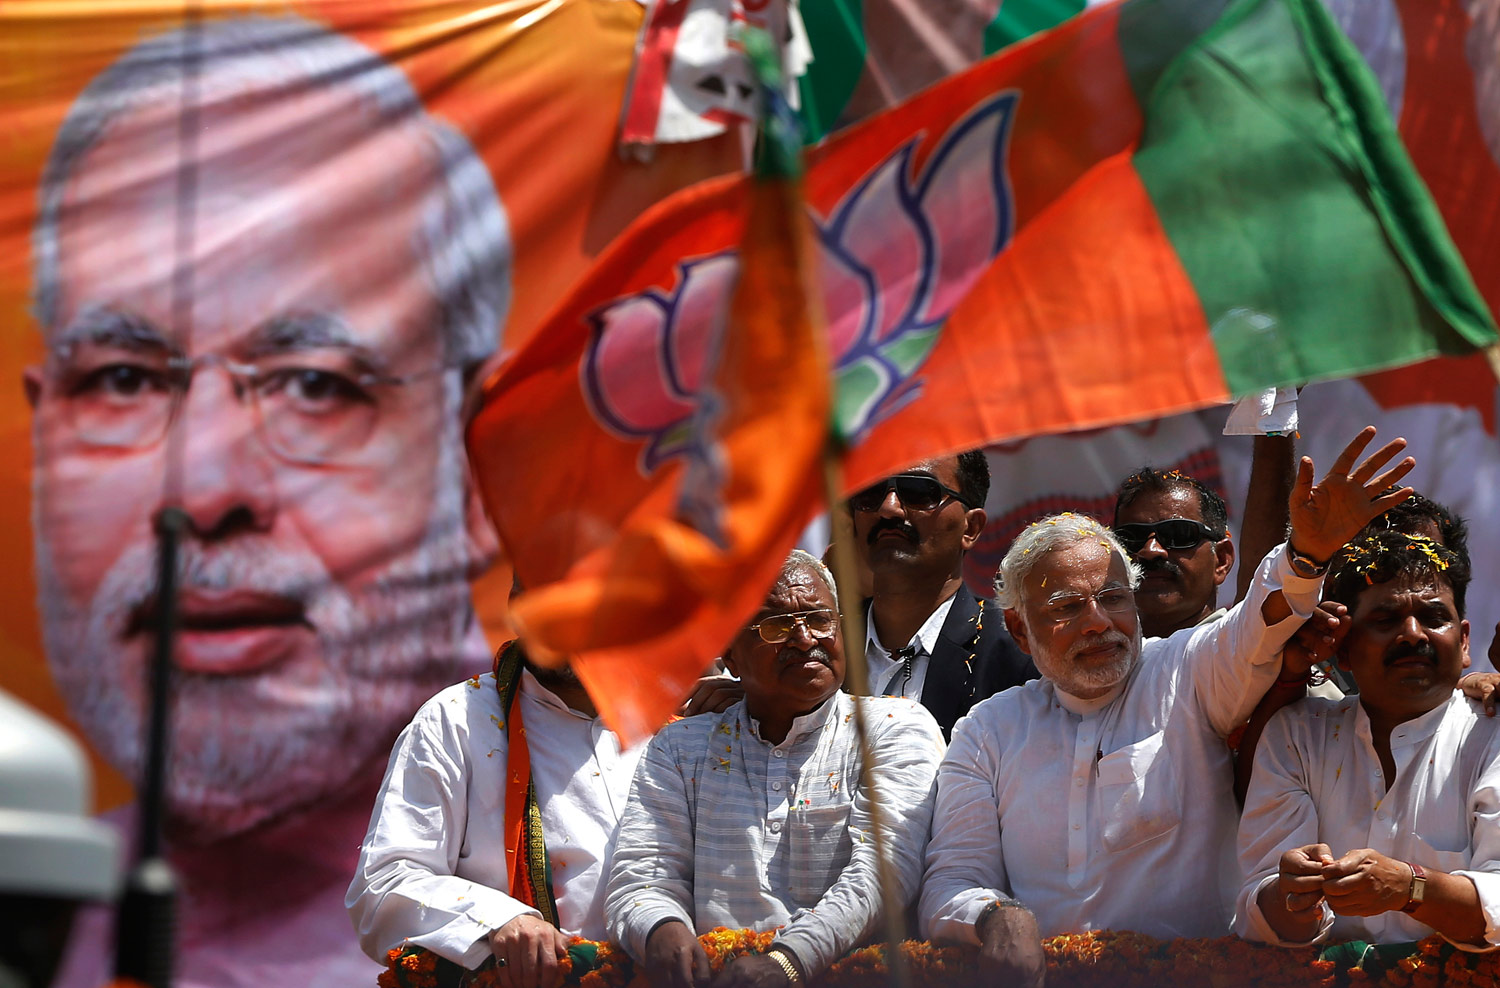 Could a Hindu Extremist Become India’s Next Prime Minister?